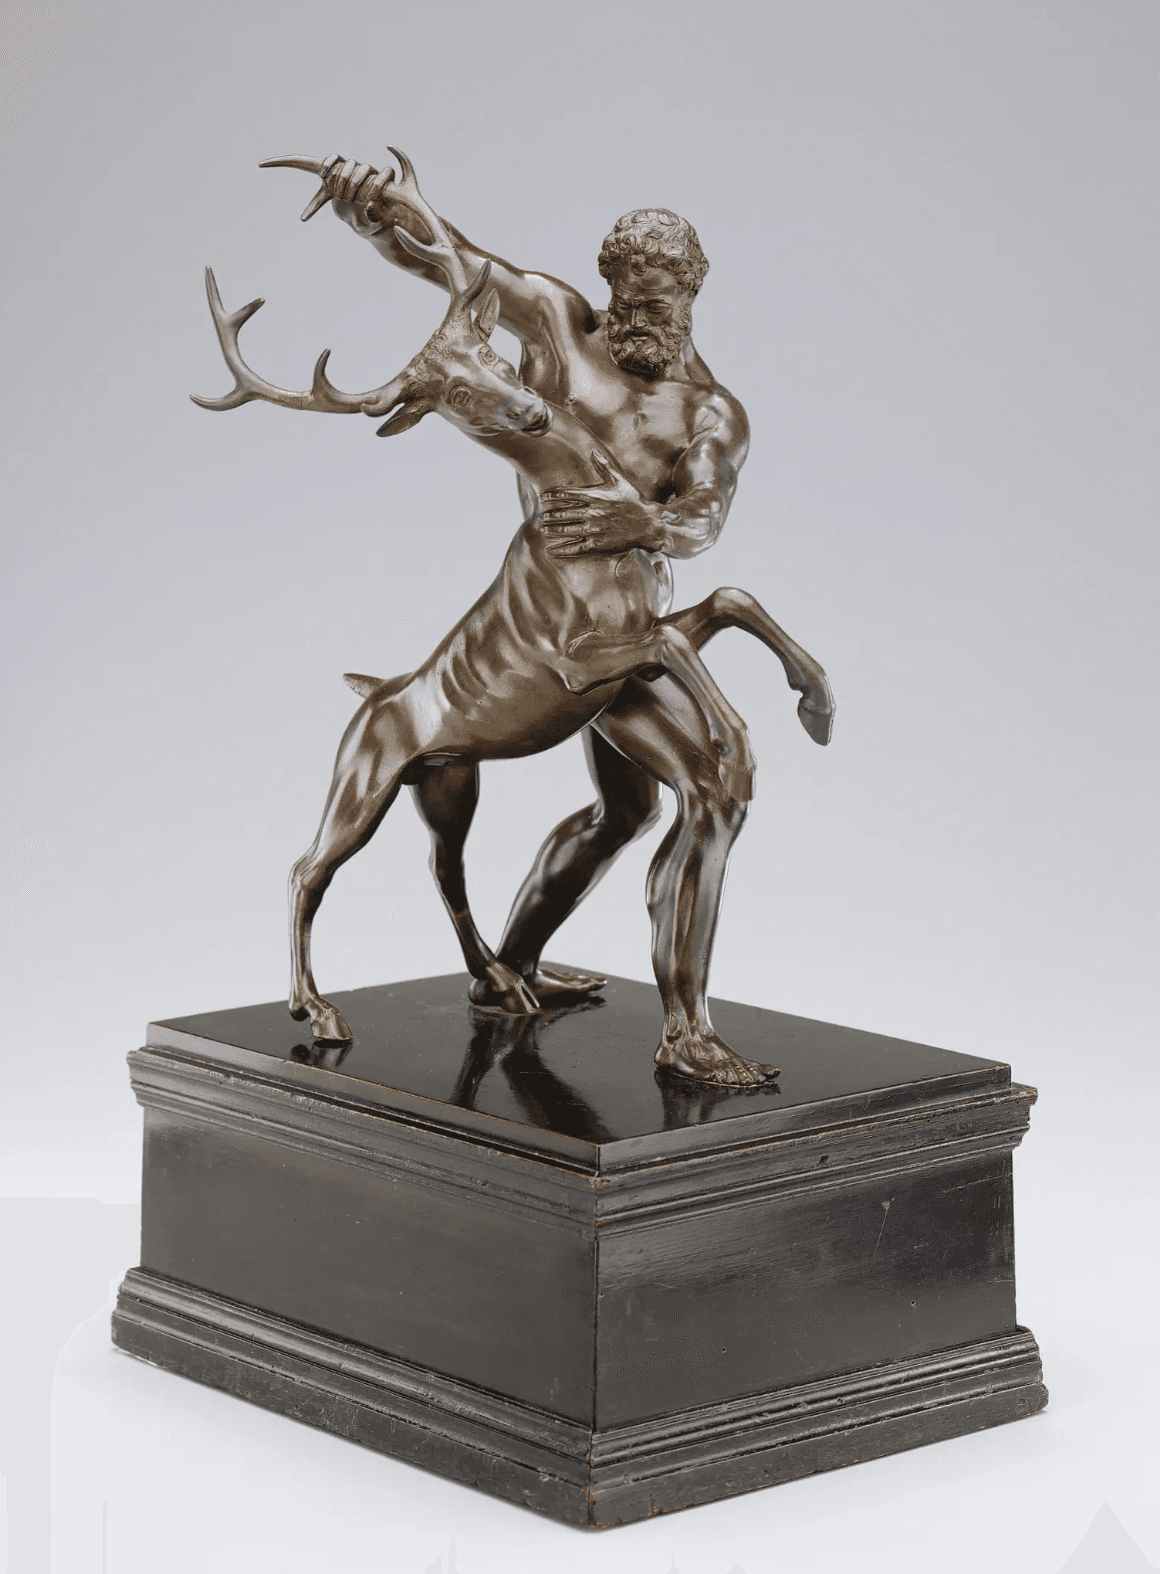 "Hercules and the Arcadian Stag," early 17th century, by Antonio Susini, bronze, after a model by Giovanni da Bologna. Gift of Mrs. Ralph Harman Booth, Detroit Institute of Arts. (Public Domain)